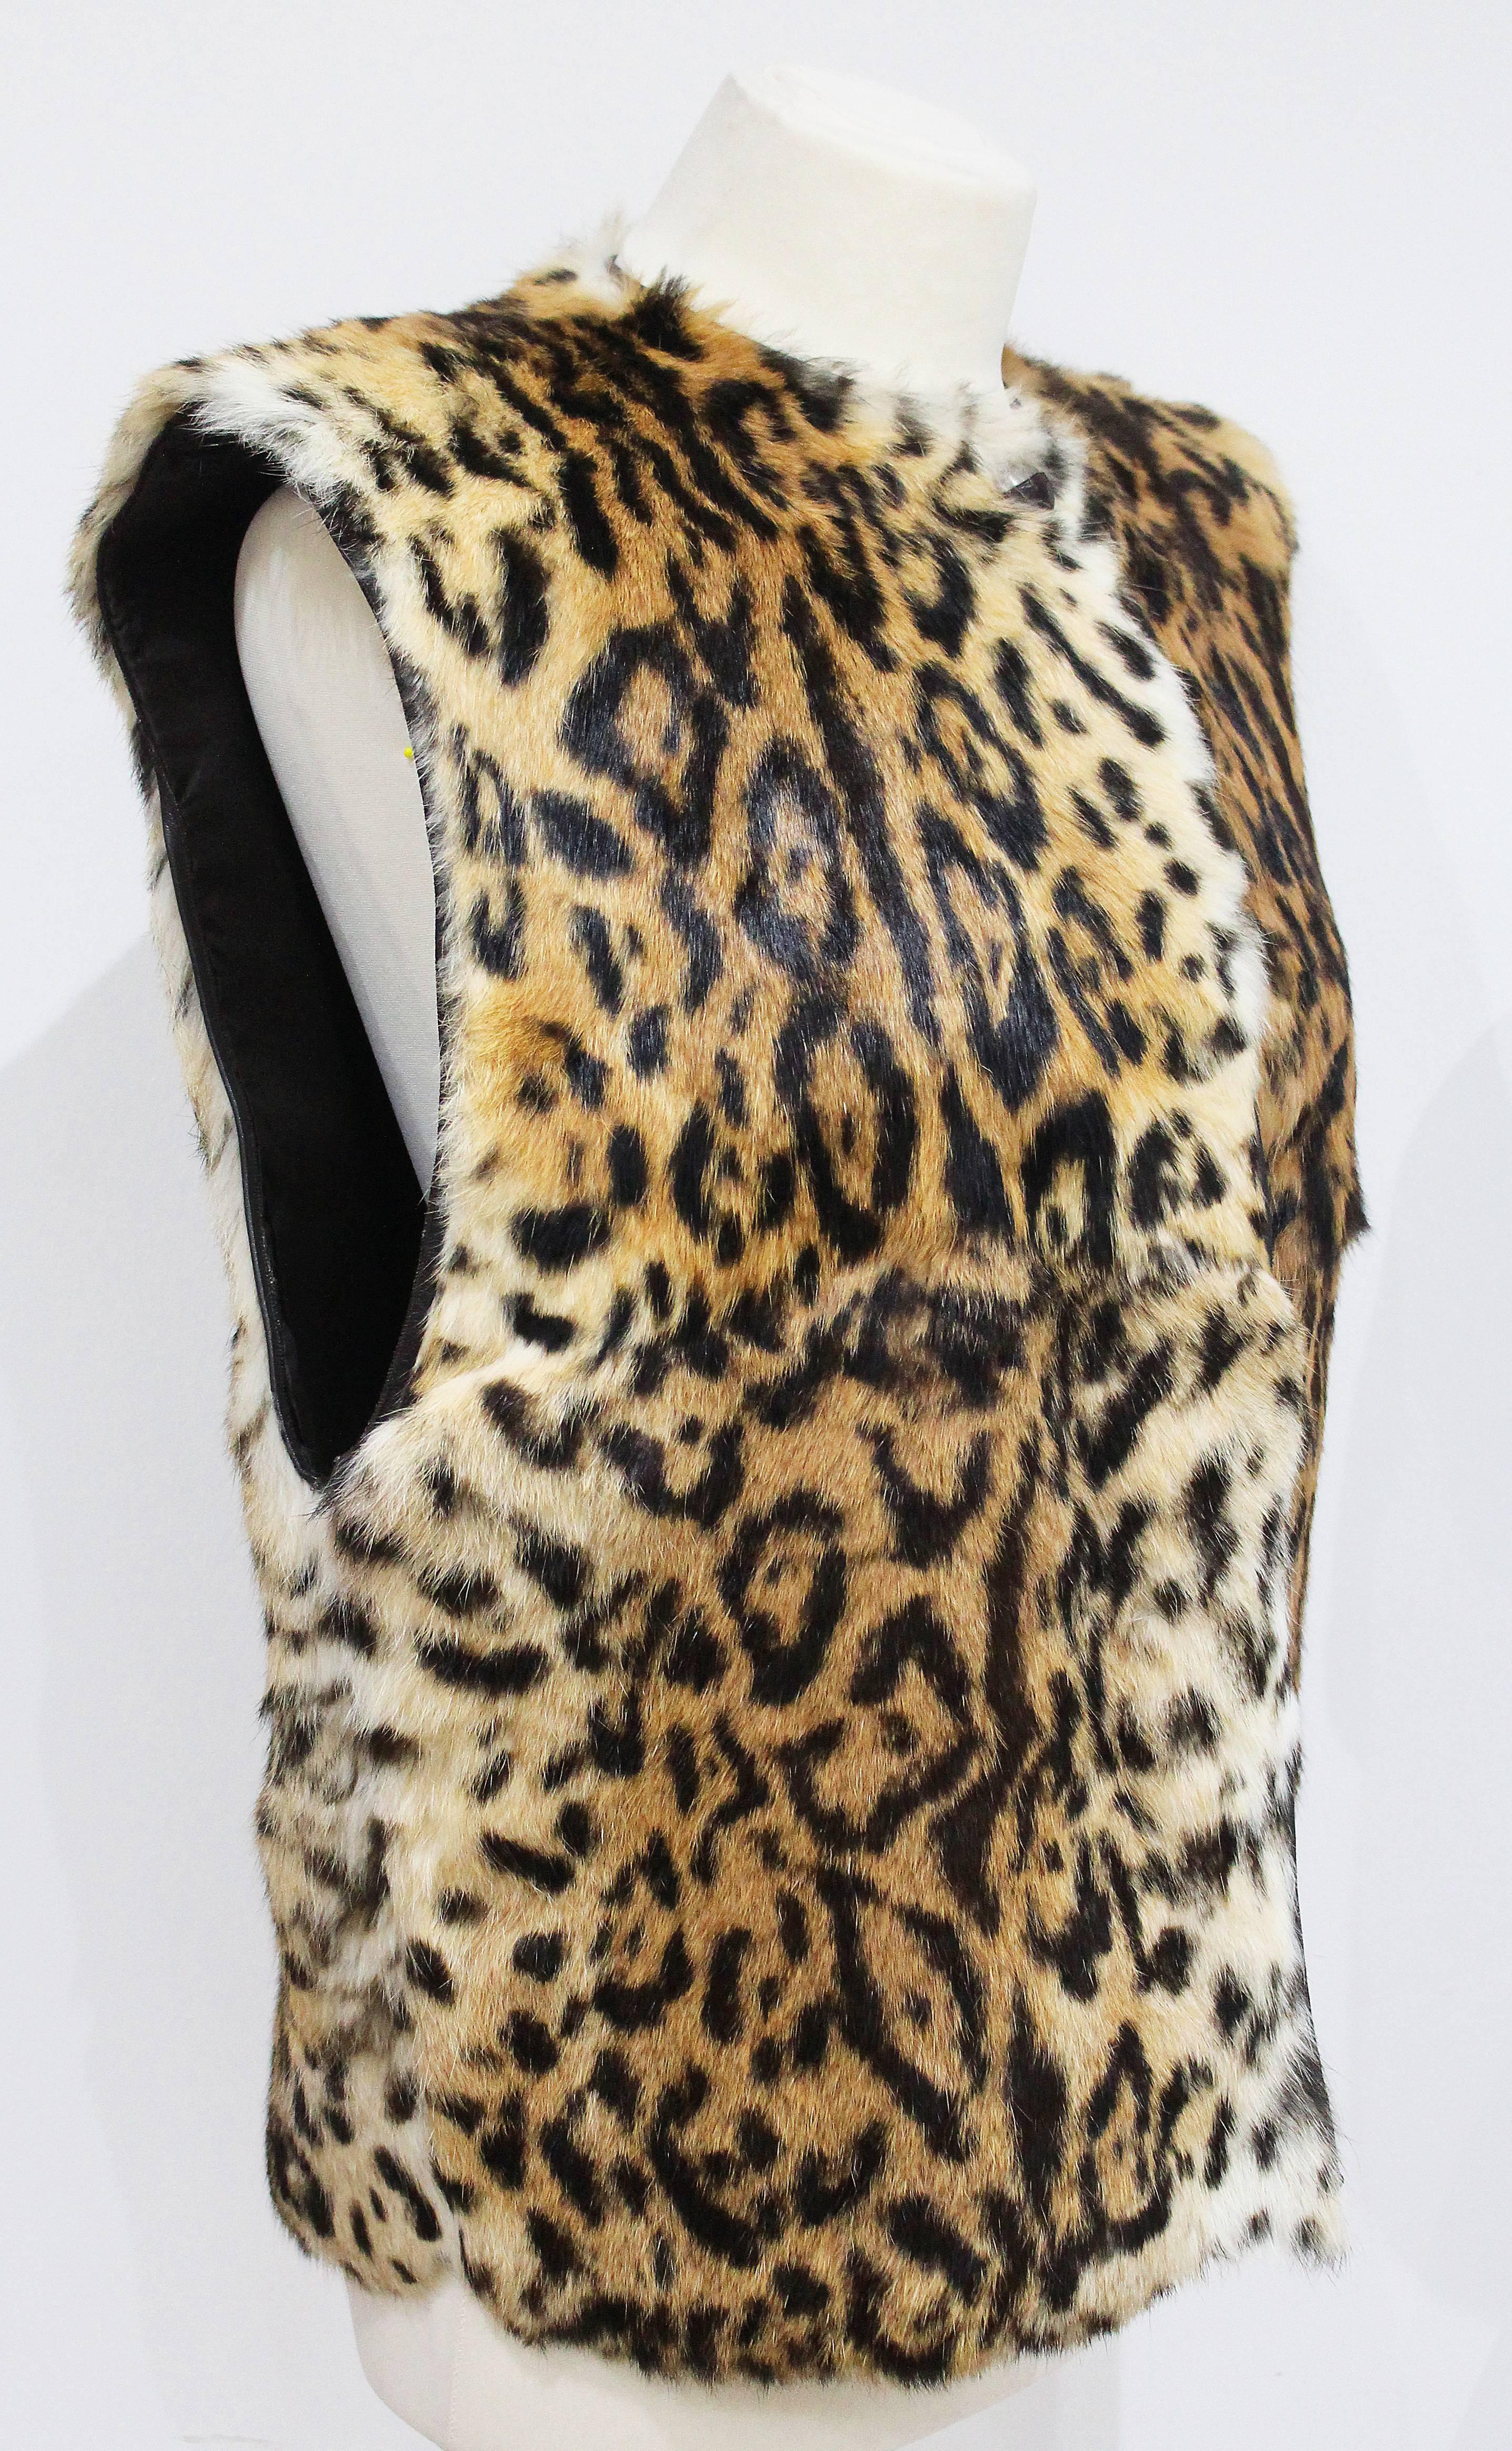 This is an early Gianni Versace fur gillet in a leopard print from the 1980s. The gillet is made of soft rabbit fur and has a 2 leather button closure. The cut of the gillet is very boxy and oversized. 

Medium/Large